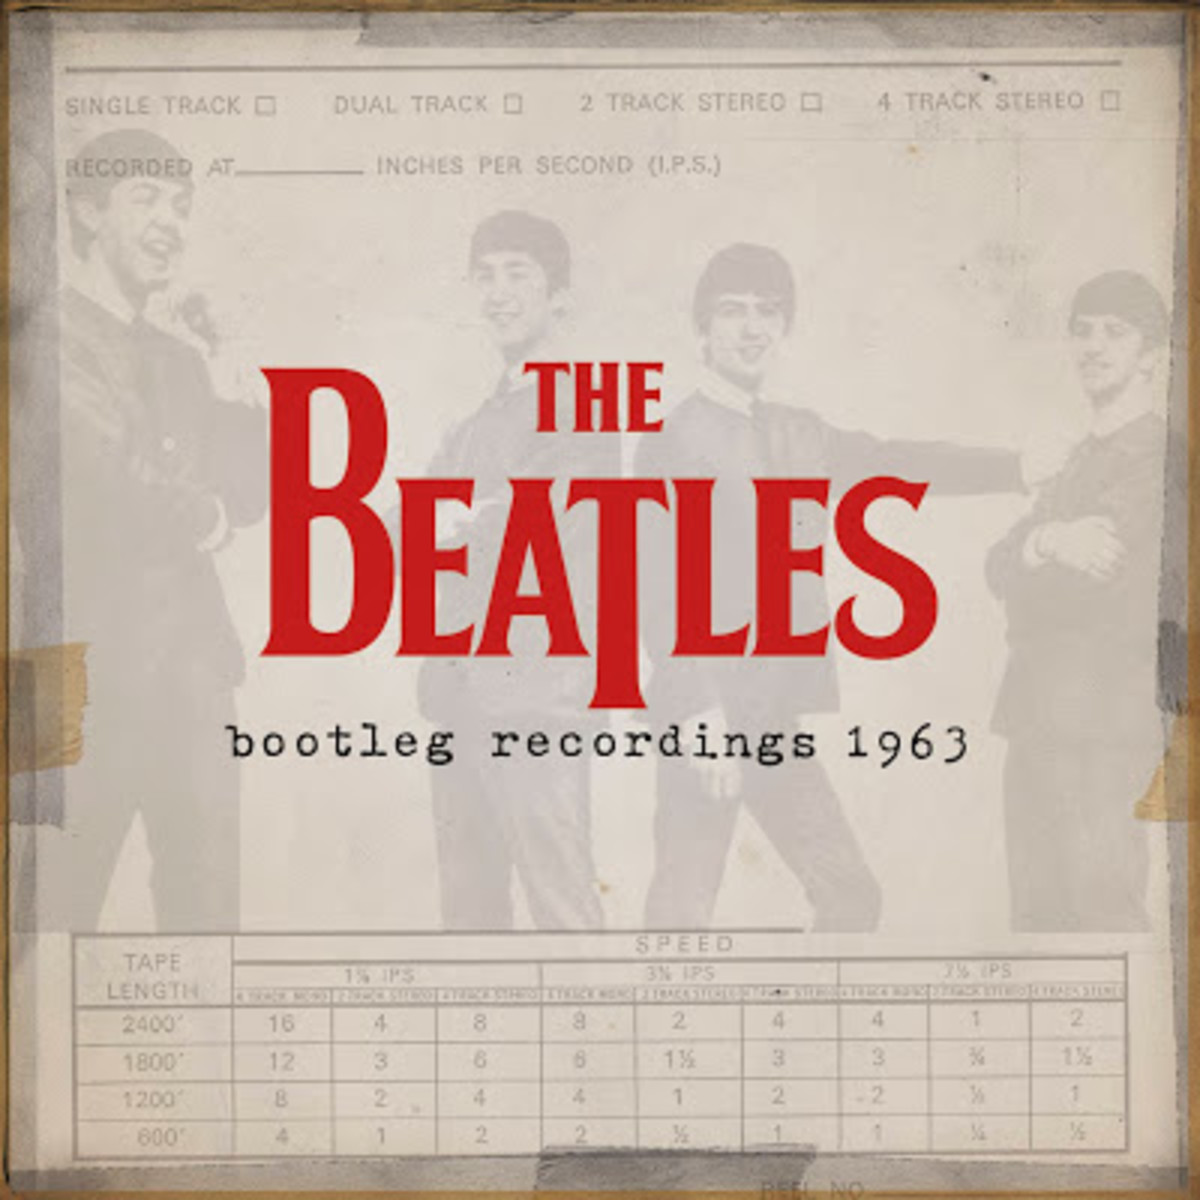 Review: The Beatles Bootleg Recordings 1963-iTunes release